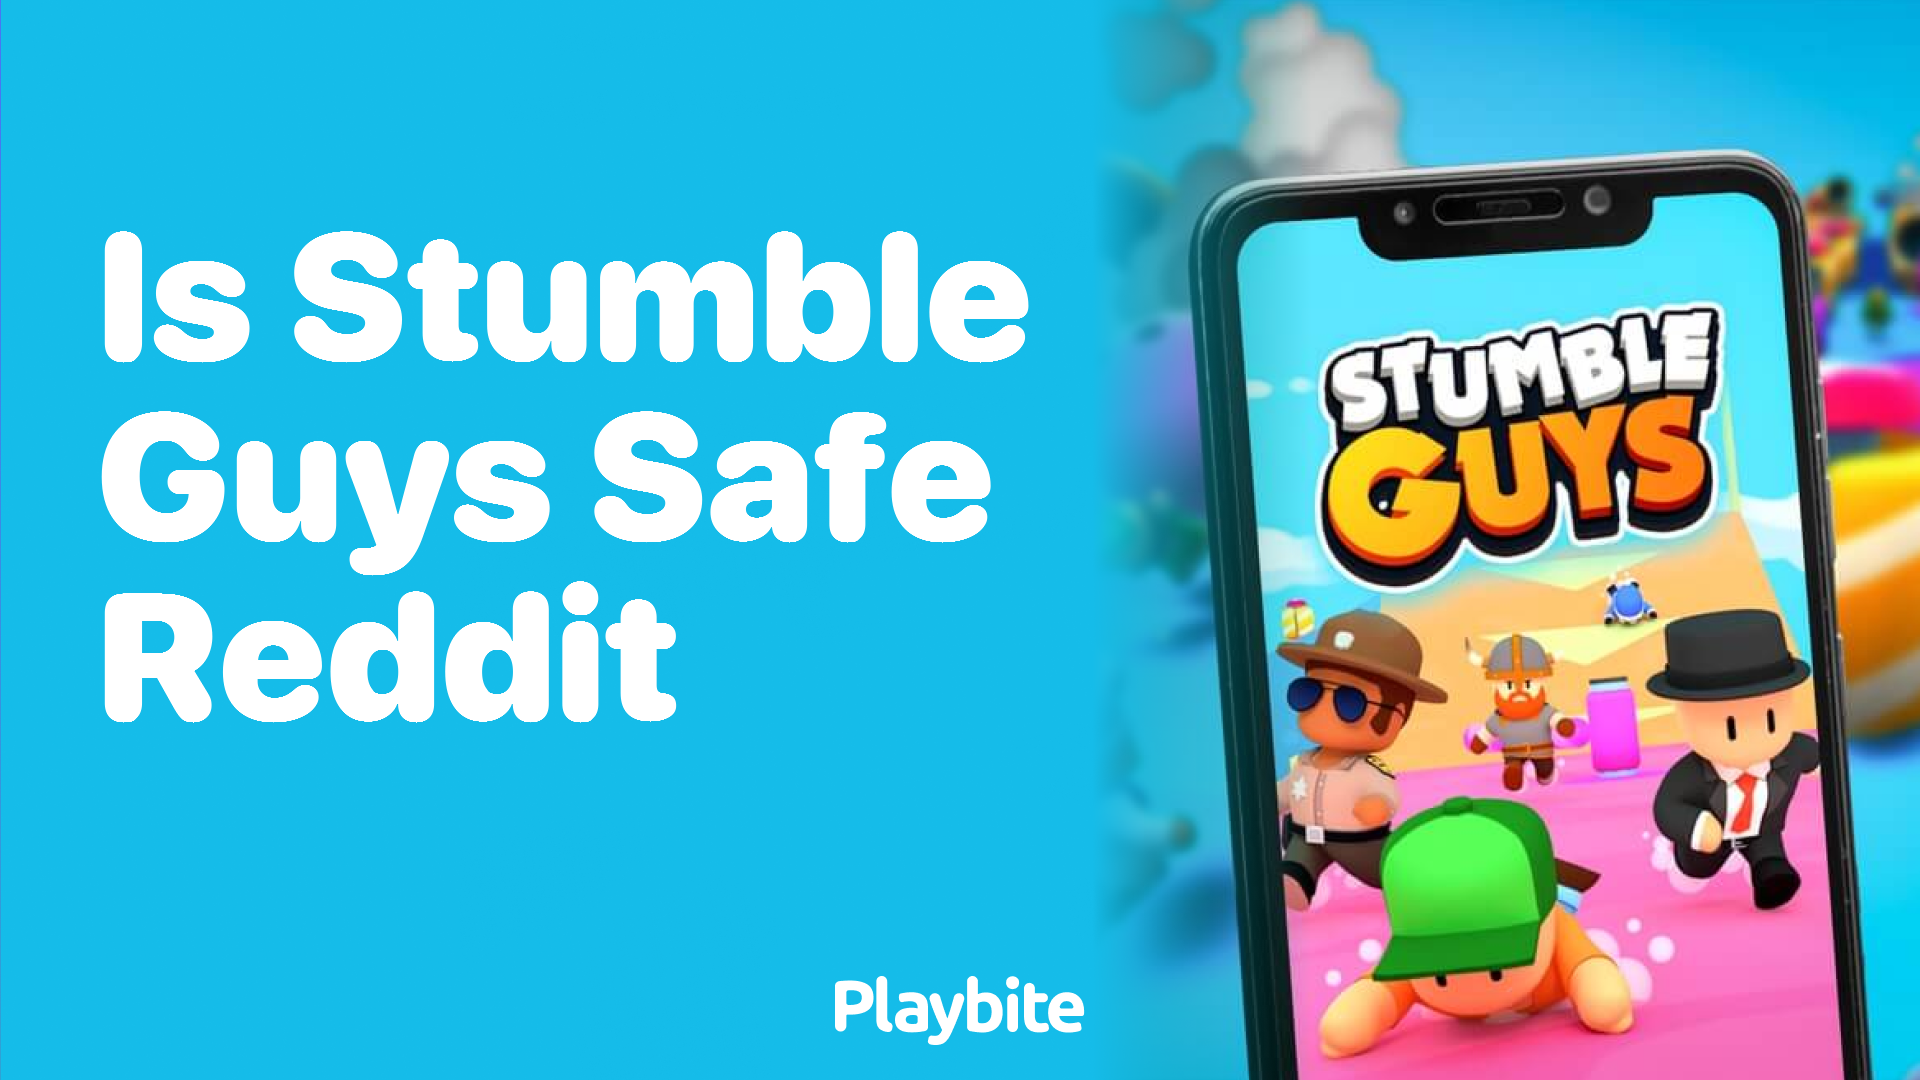 Is Stumble Guys Safe? What Reddit Says